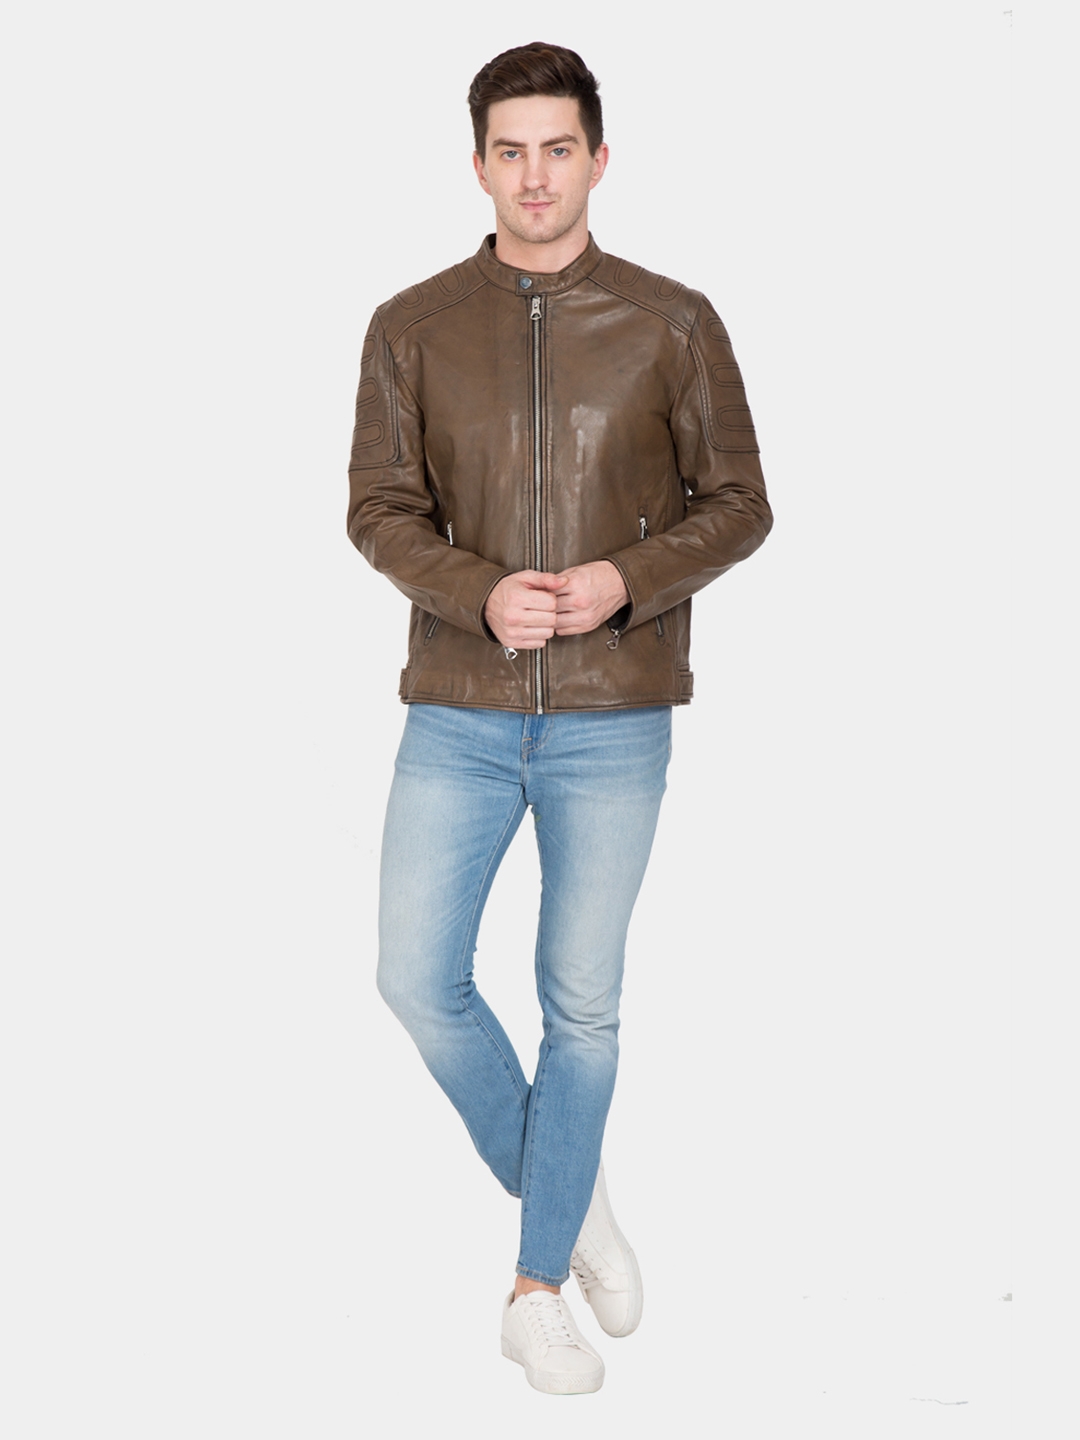 Justanned | JUSTANNED CAROB TAN LEATHER JACKET 4